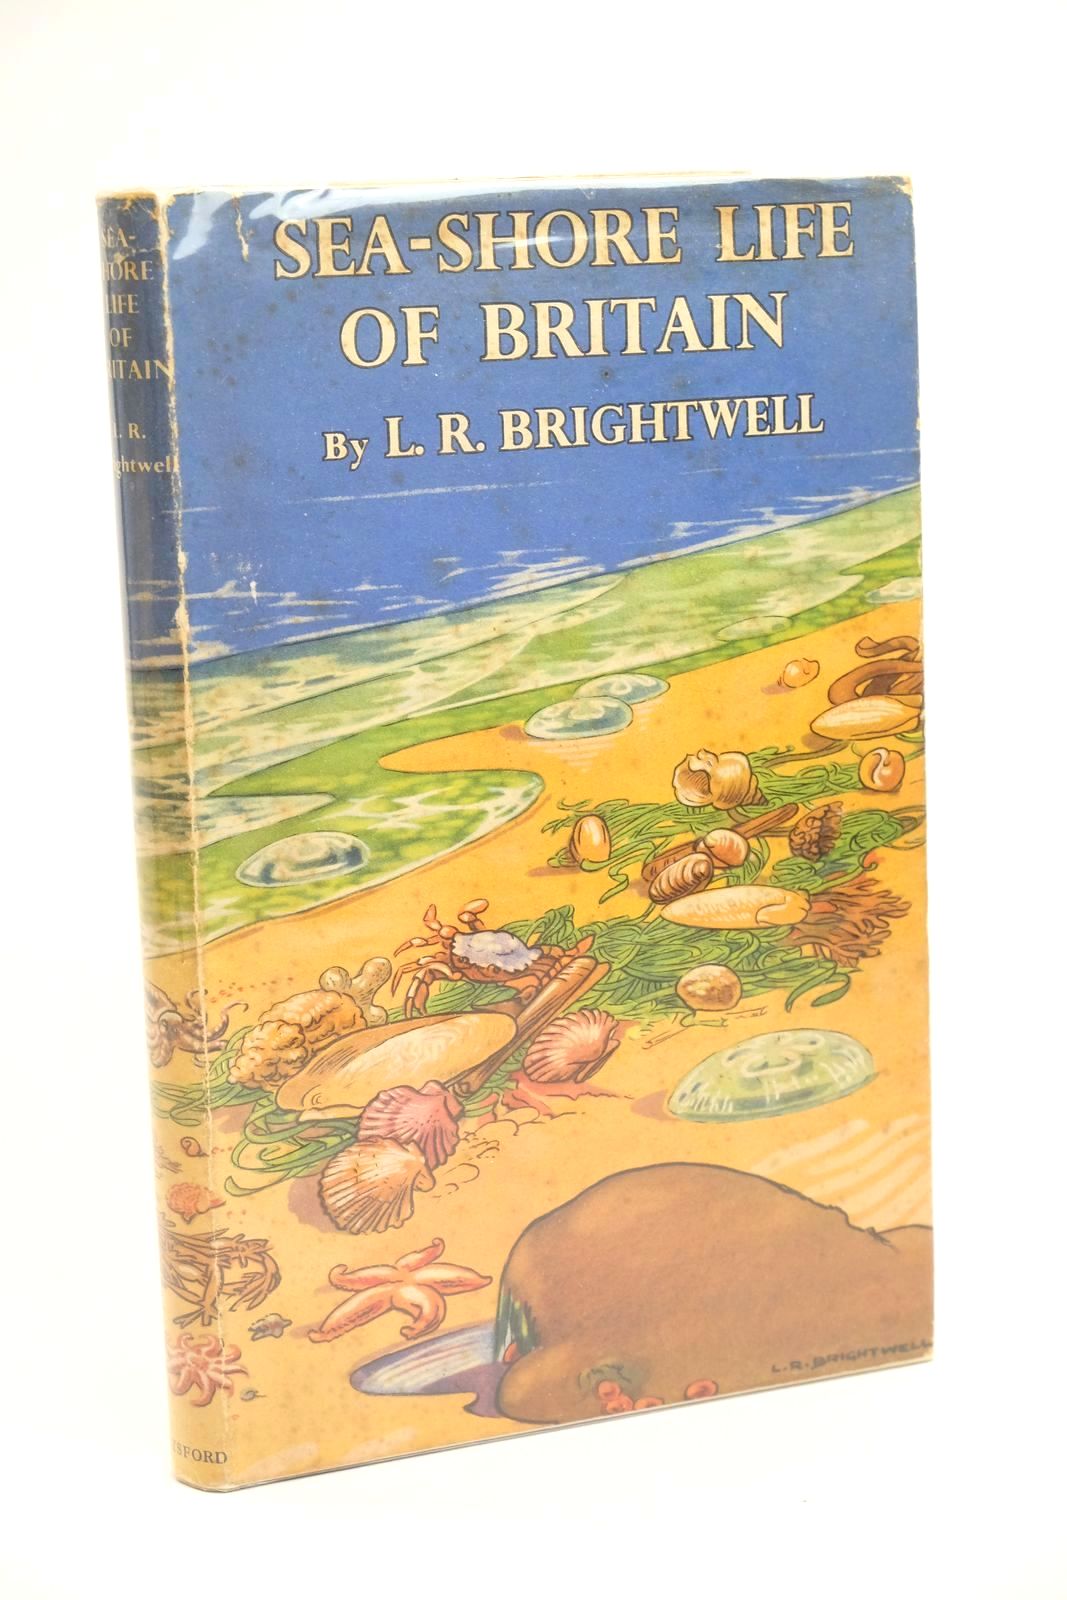 Photo of SEA-SHORE LIFE OF BRITAIN written by Brightwell, L.R. published by B.T. Batsford Ltd. (STOCK CODE: 1323181)  for sale by Stella & Rose's Books